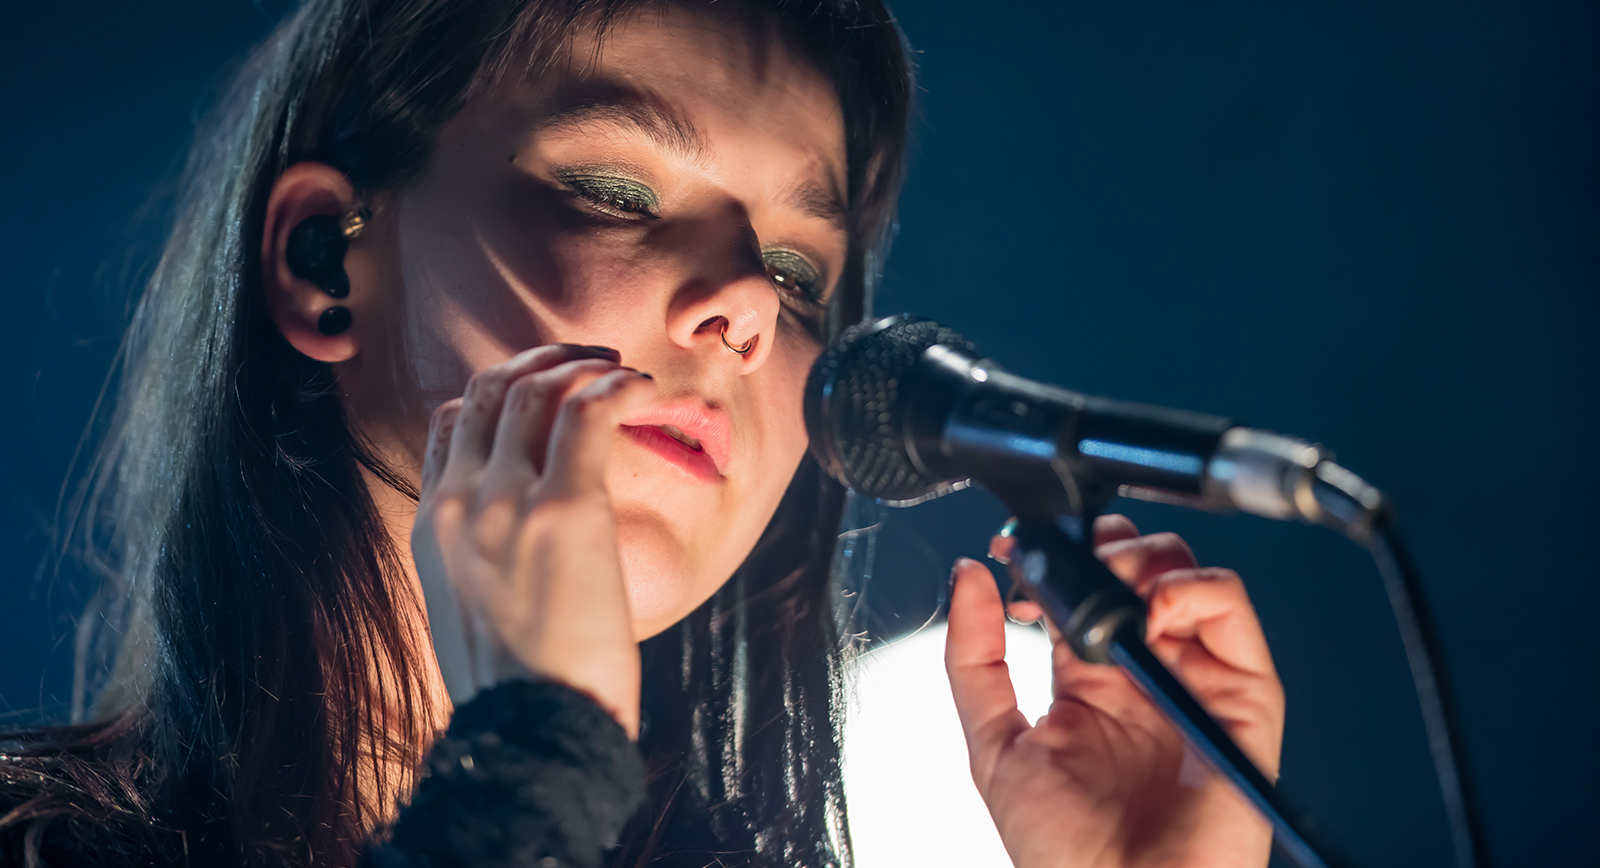 Of-Monsters-And-Men-2016-Tour-Concert-Review-Photo-Photography-Muna-Grand-Sierra-FI